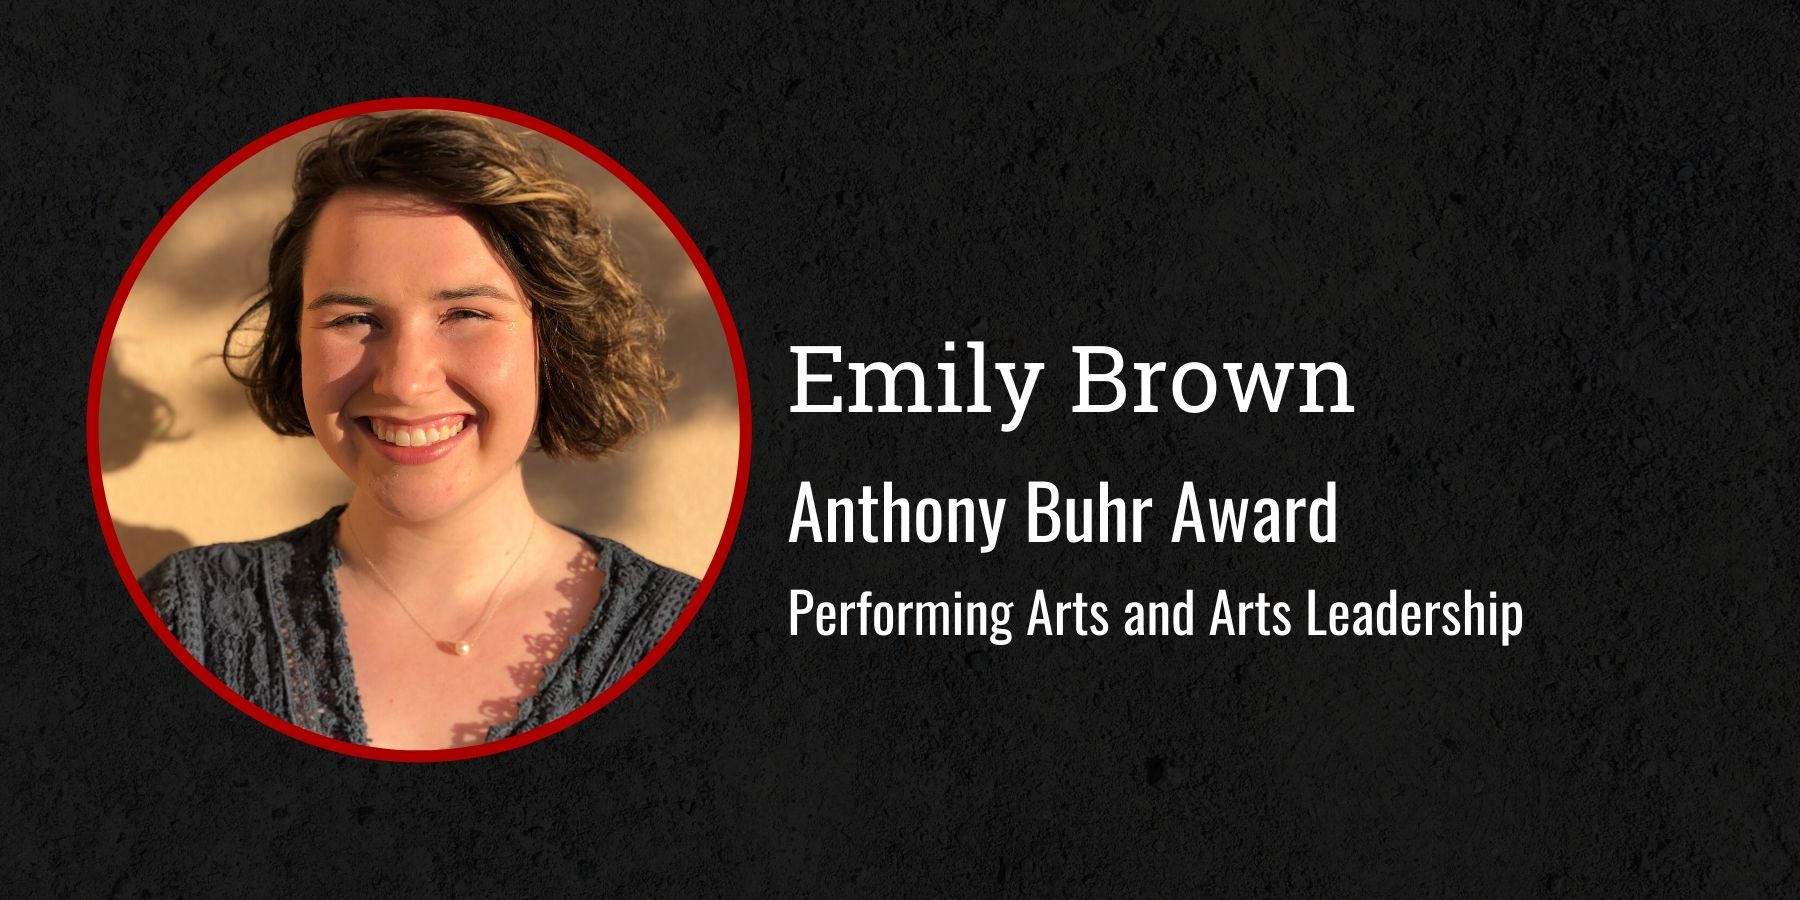 Photo of Emily Brown and text Anthony Buhr Award, Performing arts and Arts leadership